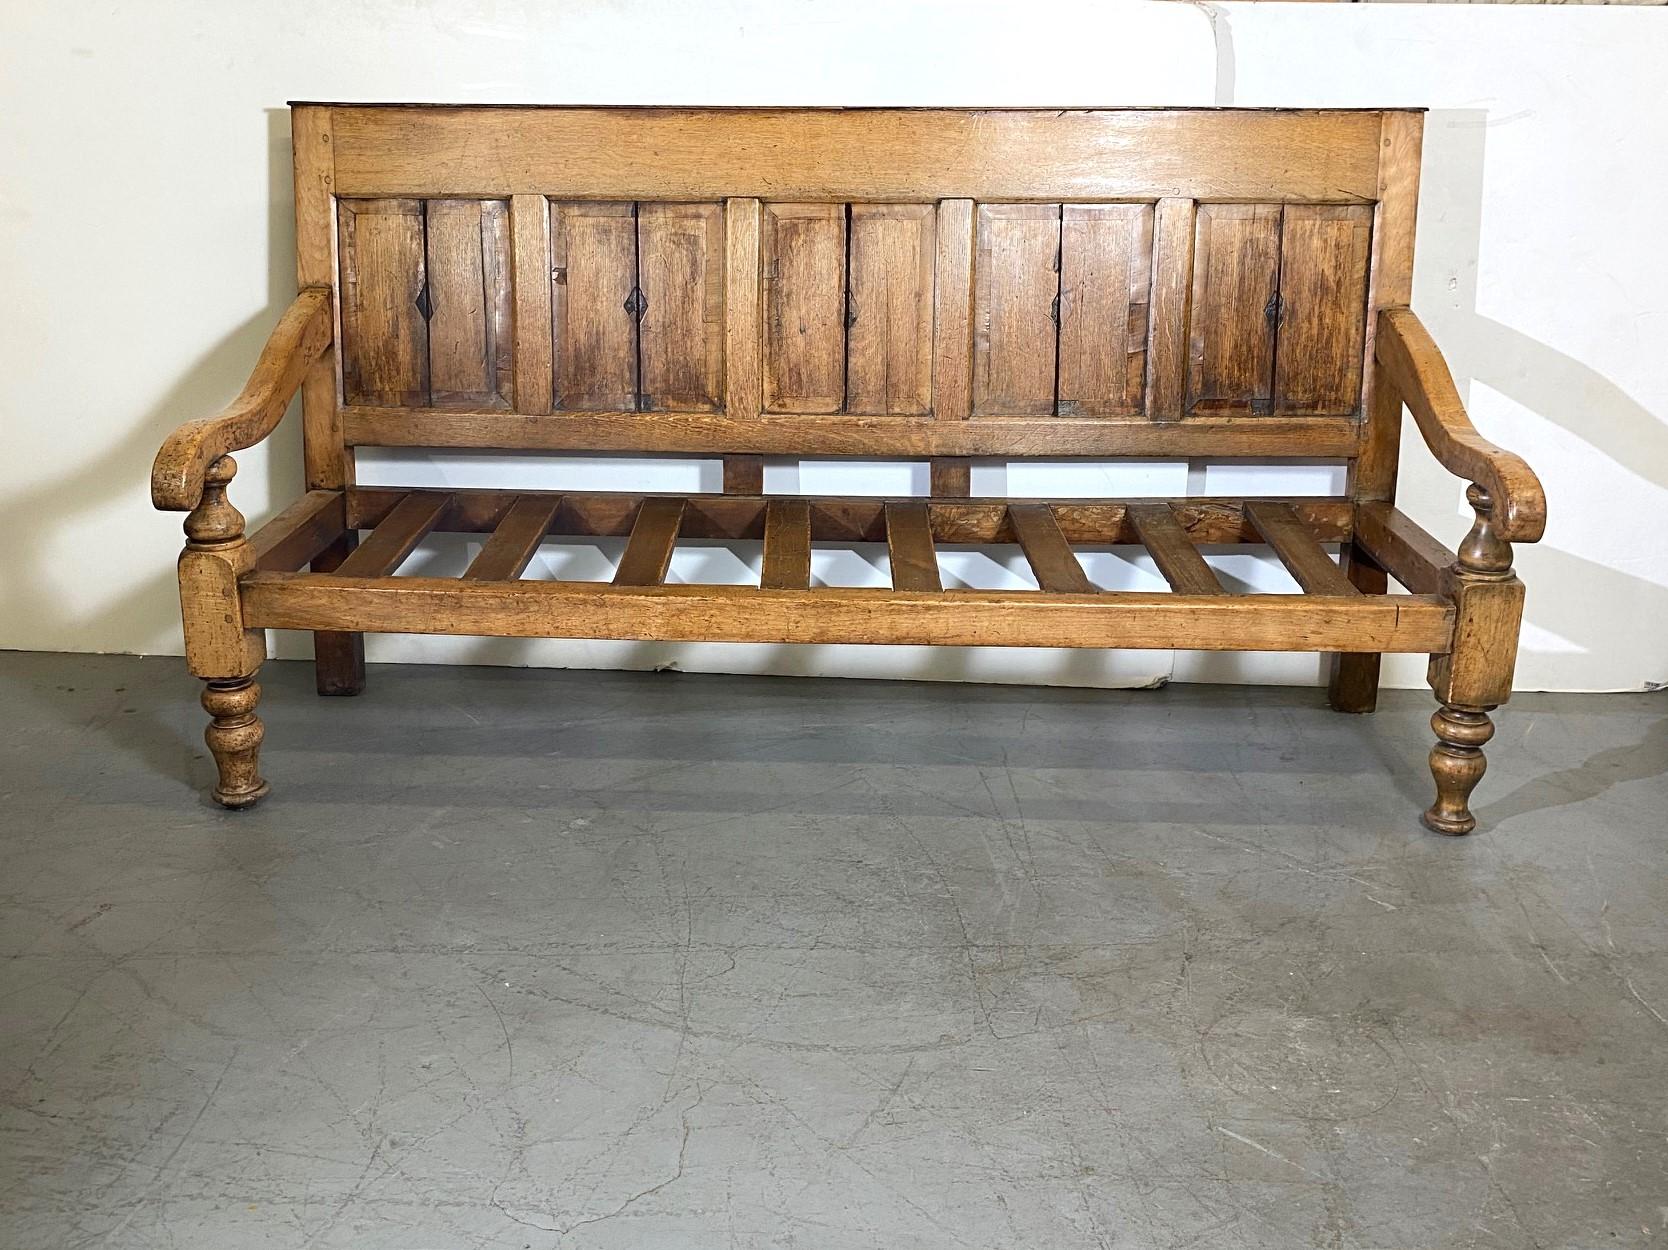 An English 1840 bench. Raised chamfered panels to the back. Dowl peg construction. Turned legs and arm support with loose cushion. New upholstery.